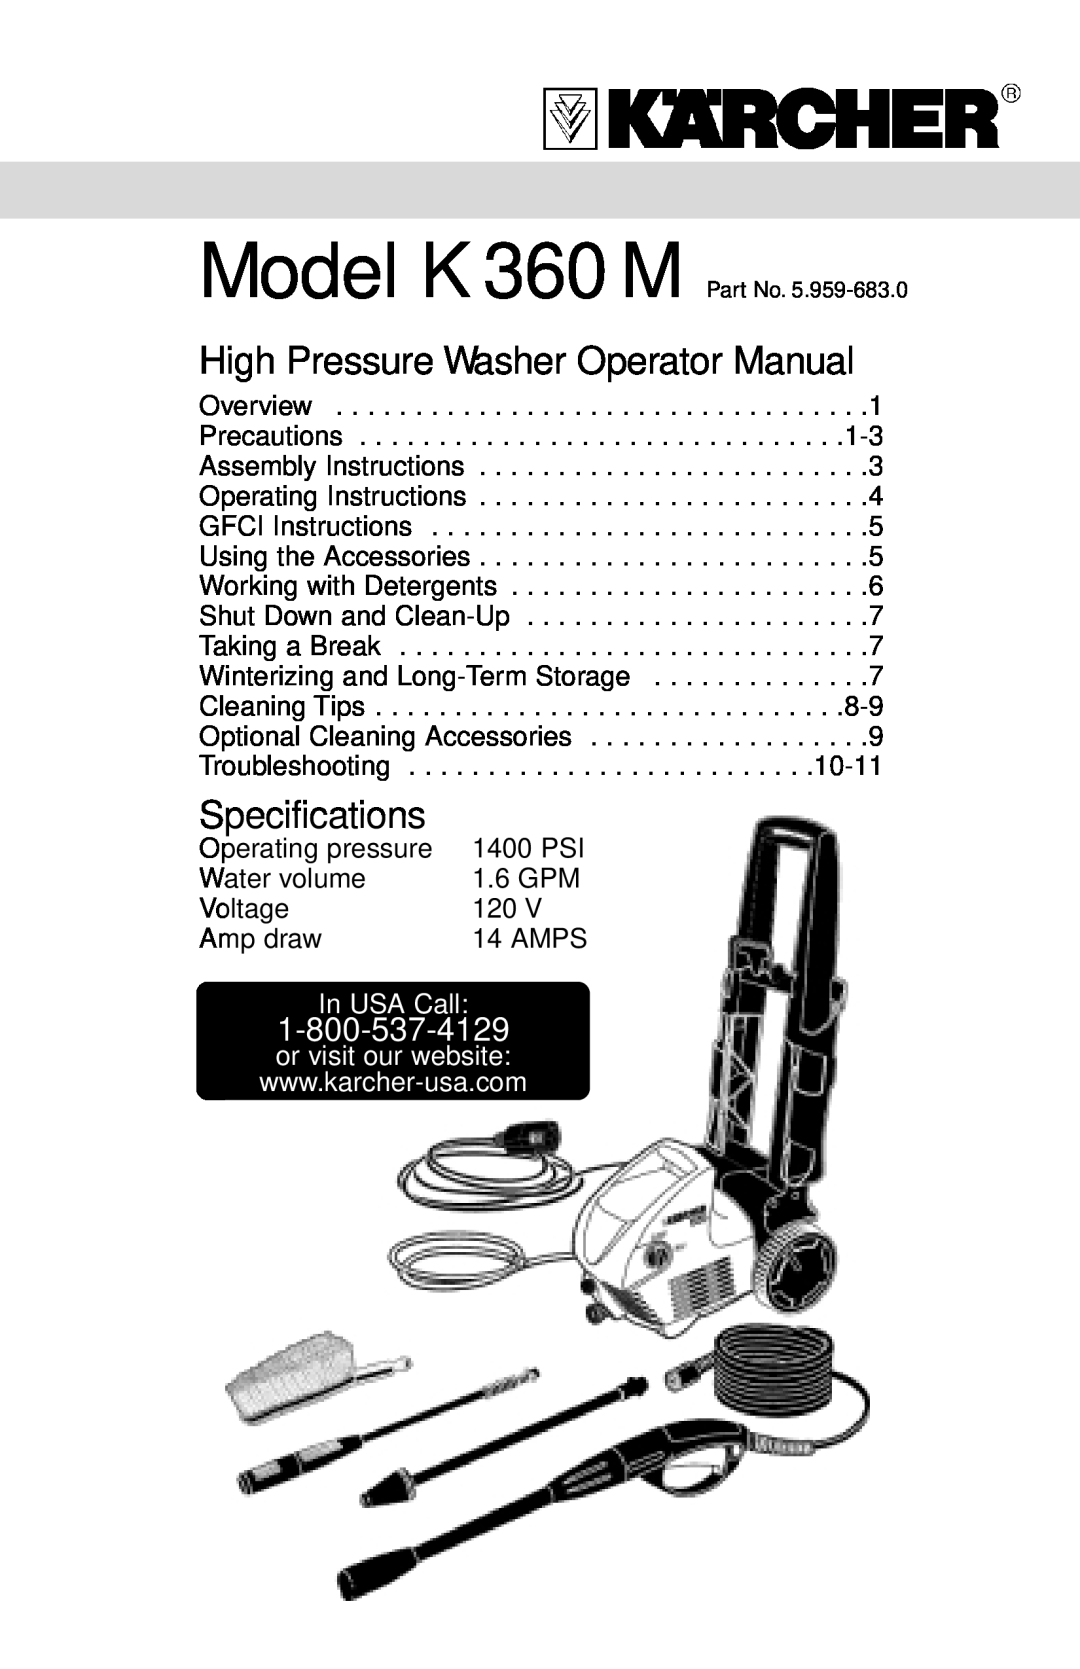 Karcher K 360 M specifications In USA Call, High Pressure Washer Operator Manual, Specifications 